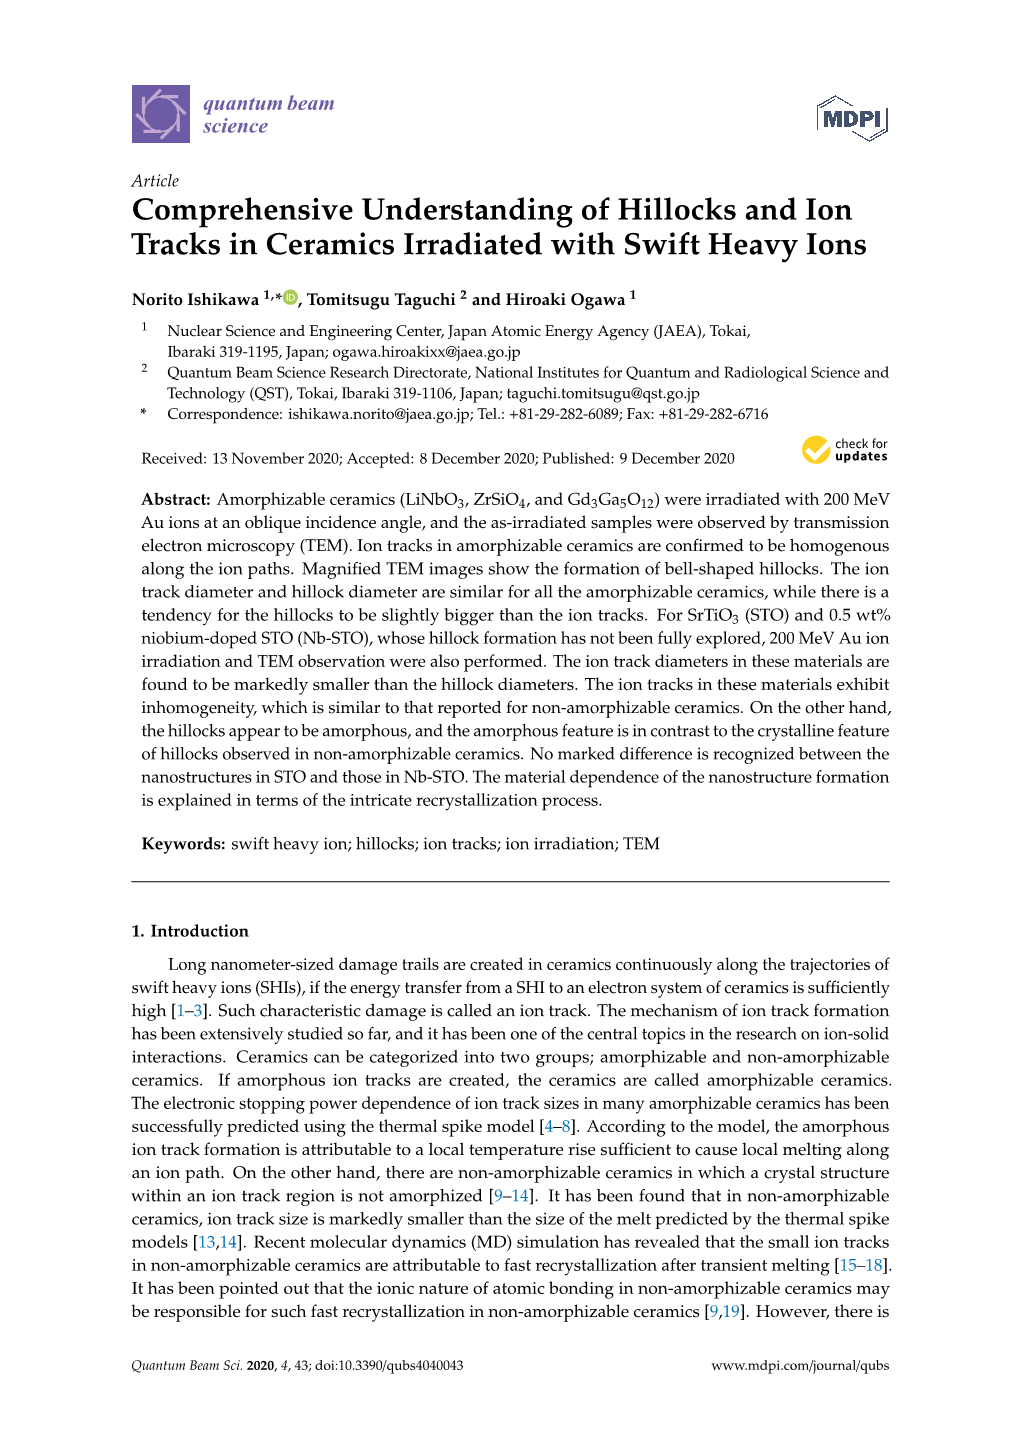 Comprehensive Understanding of Hillocks and Ion Tracks in Ceramics Irradiated with Swift Heavy Ions